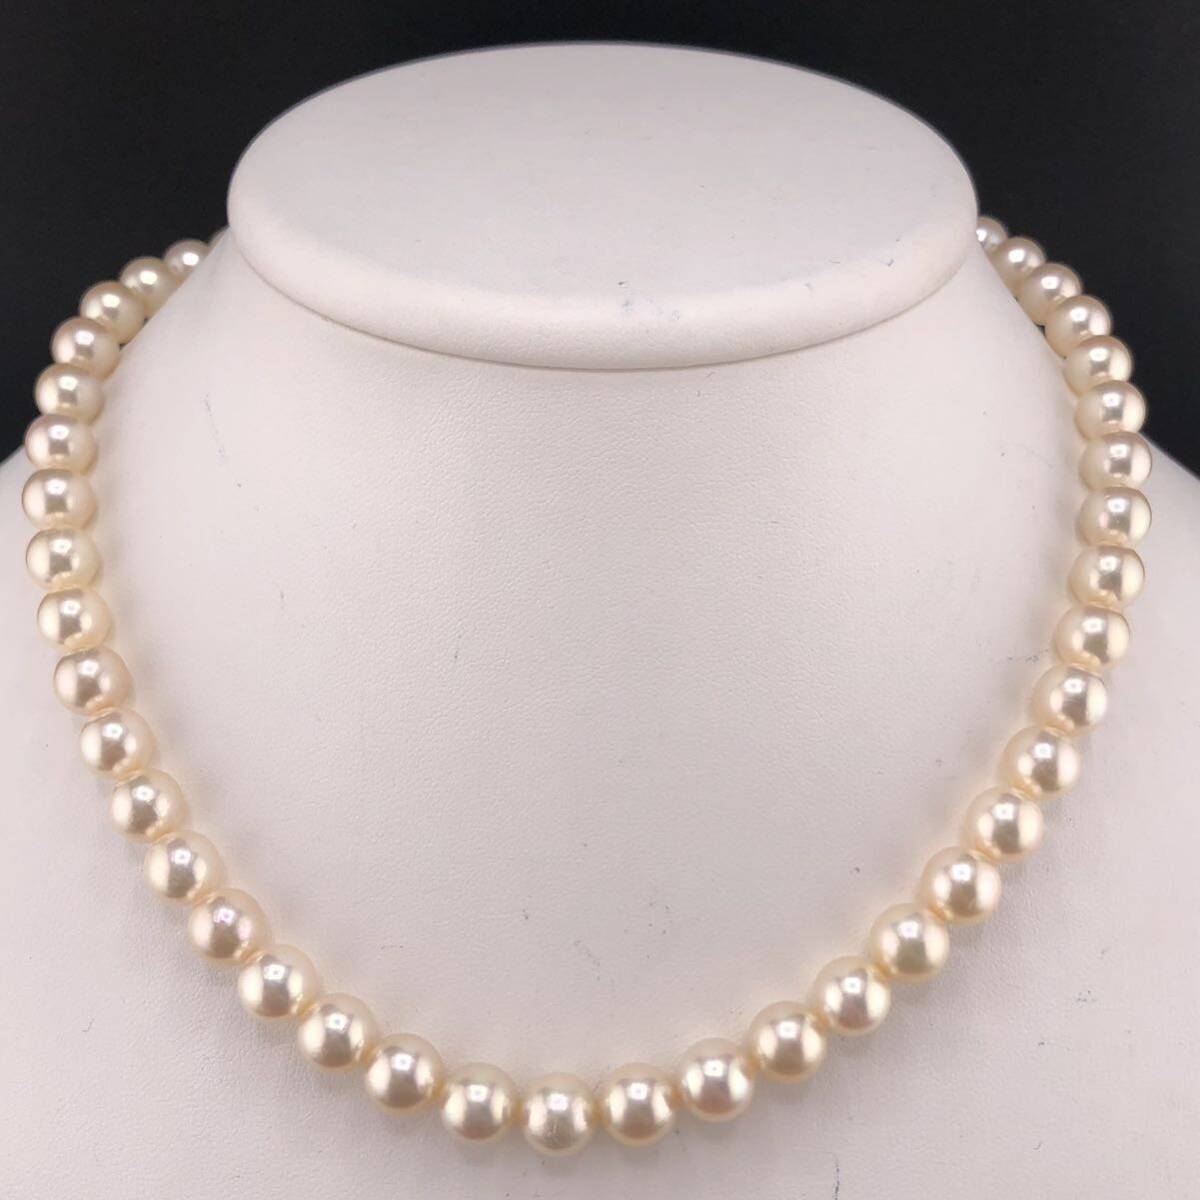 E04-1545☆ アコヤパールネックレス 8.0mm~8.5mm 41cm 43g ( アコヤ真珠 Pearl necklace SILVER )の画像1